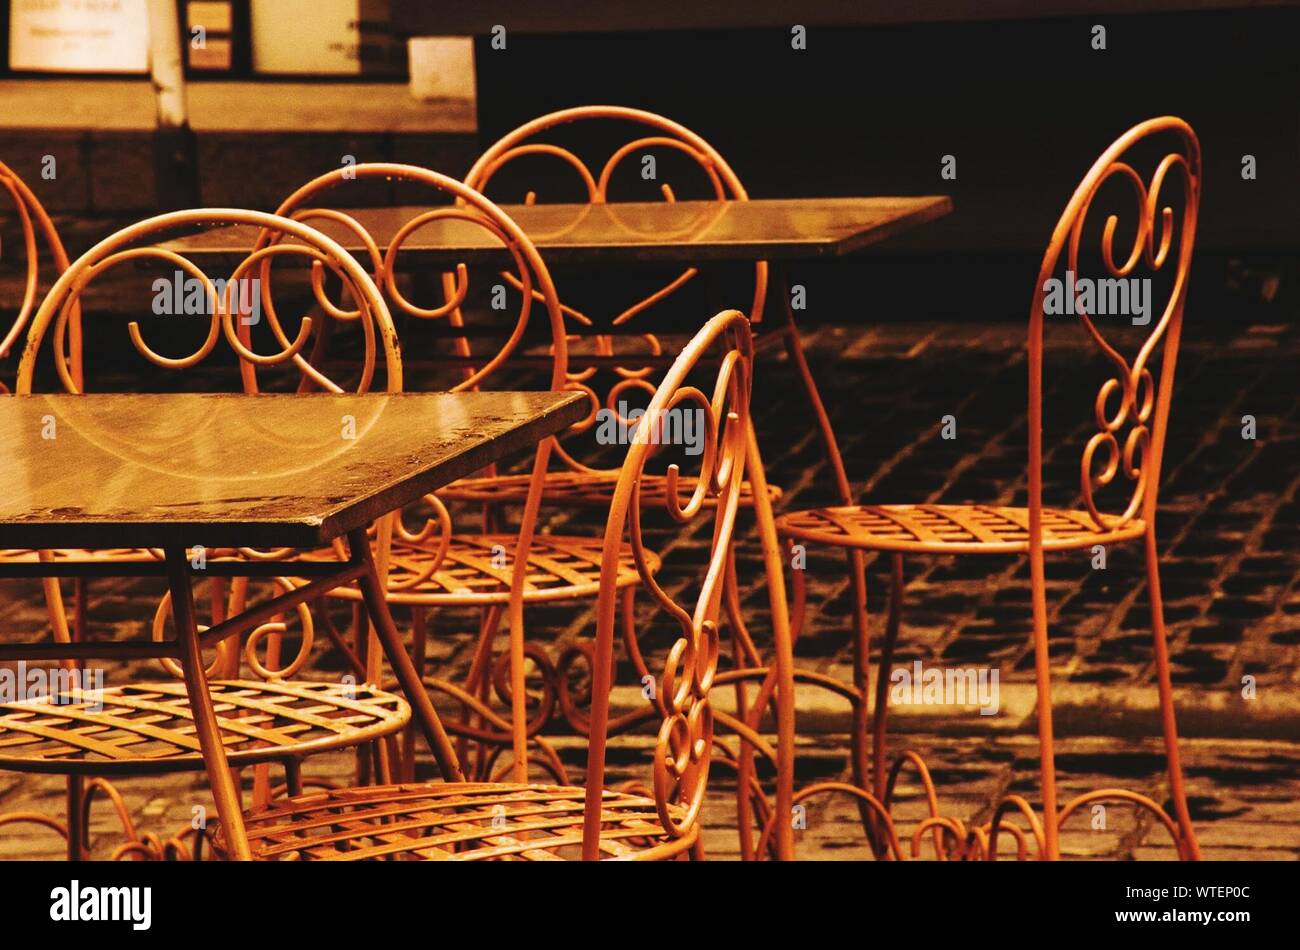 Empty Cafe Table And Chairs Stock Photos Empty Cafe Table And